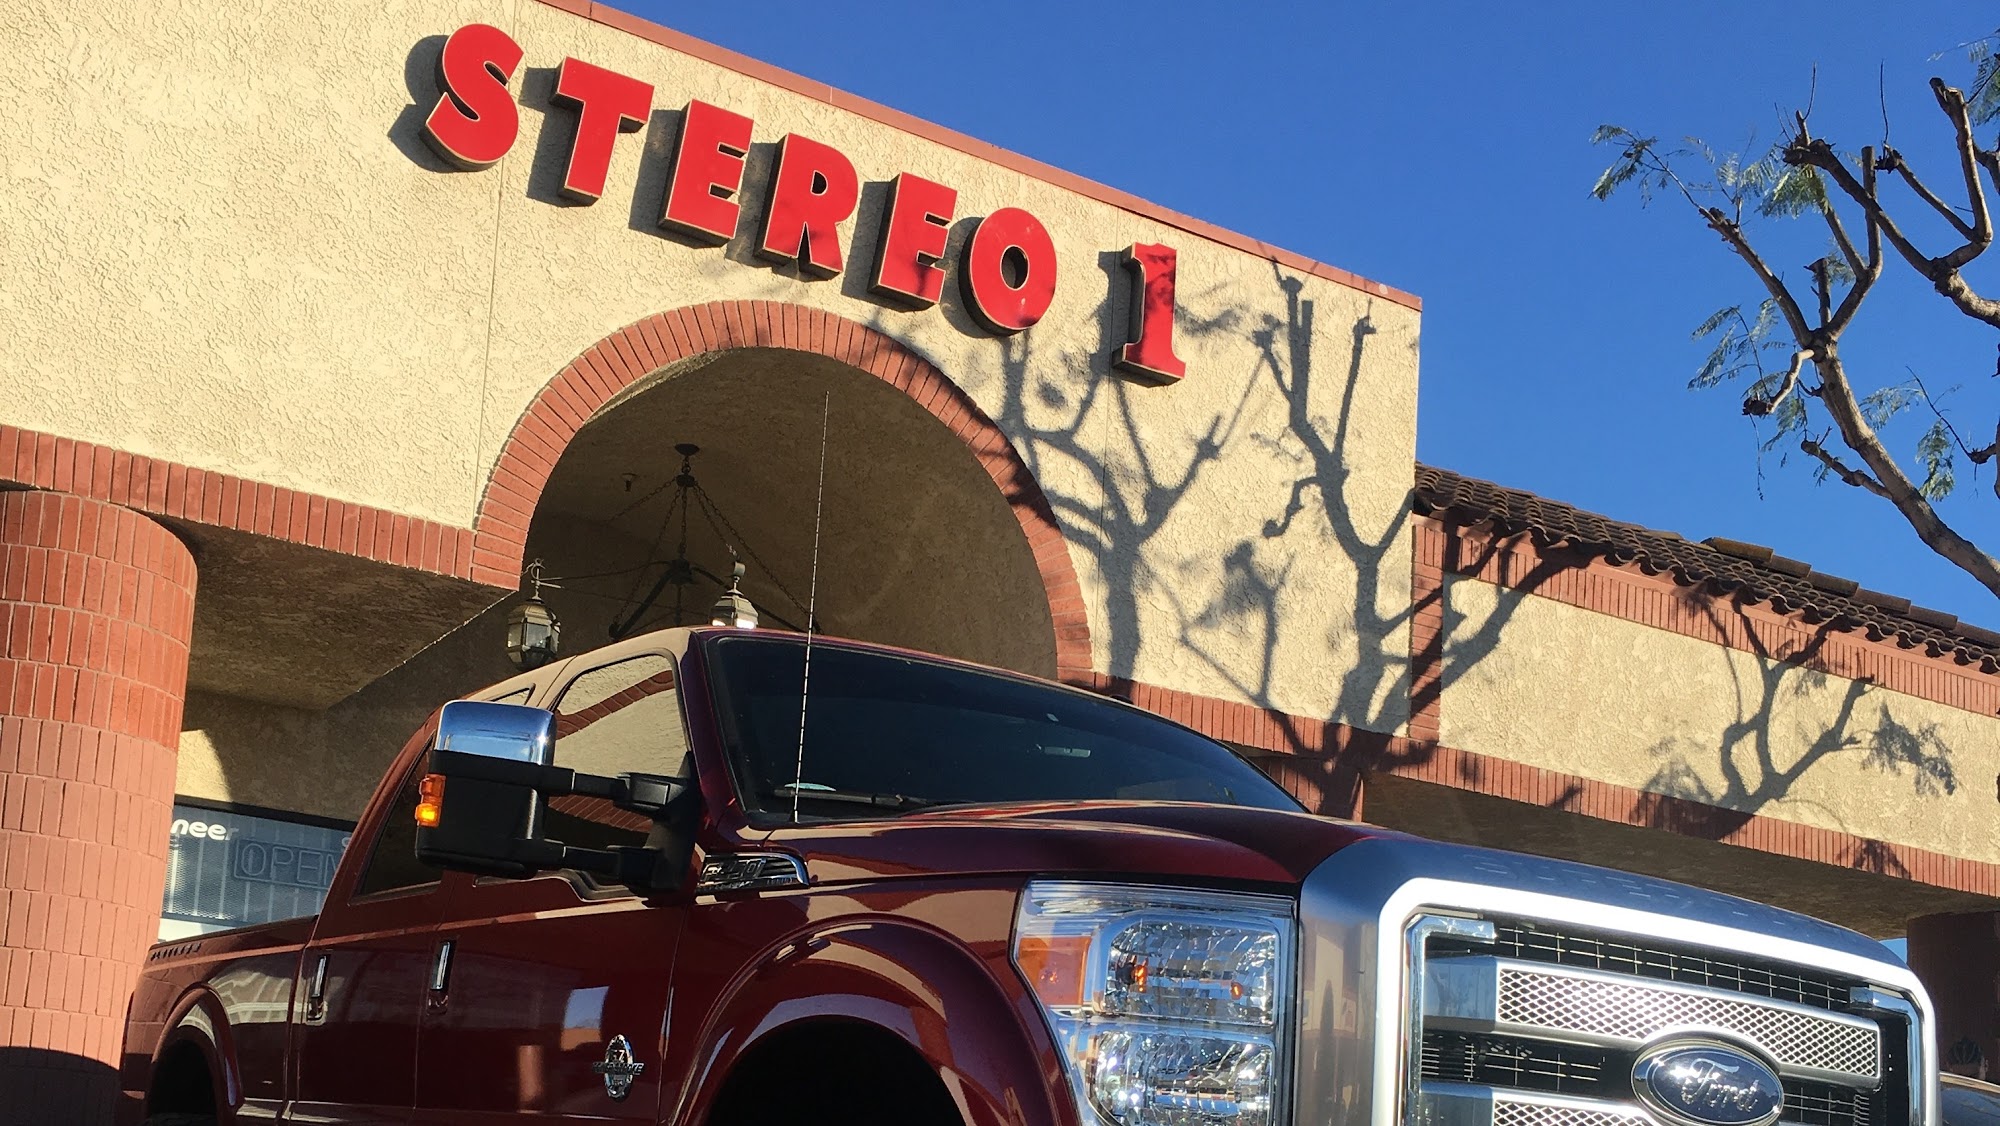 Stereo 1 Shop